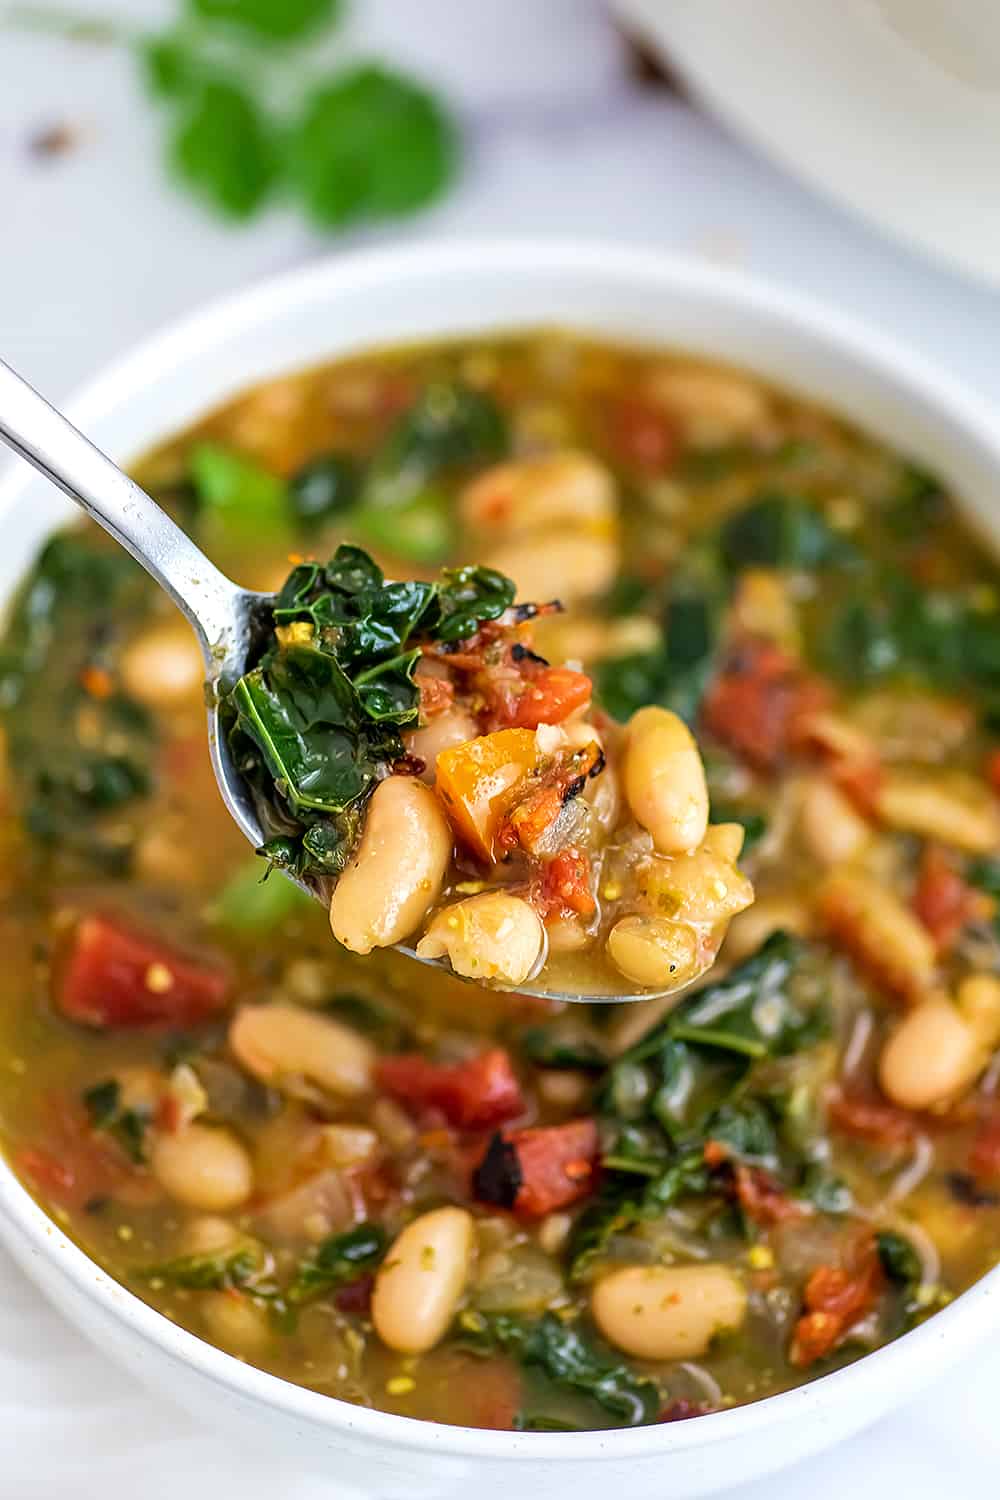 Spicy White Bean Stew - Quick, Easy, 20 Minutes | Bites of Wellness